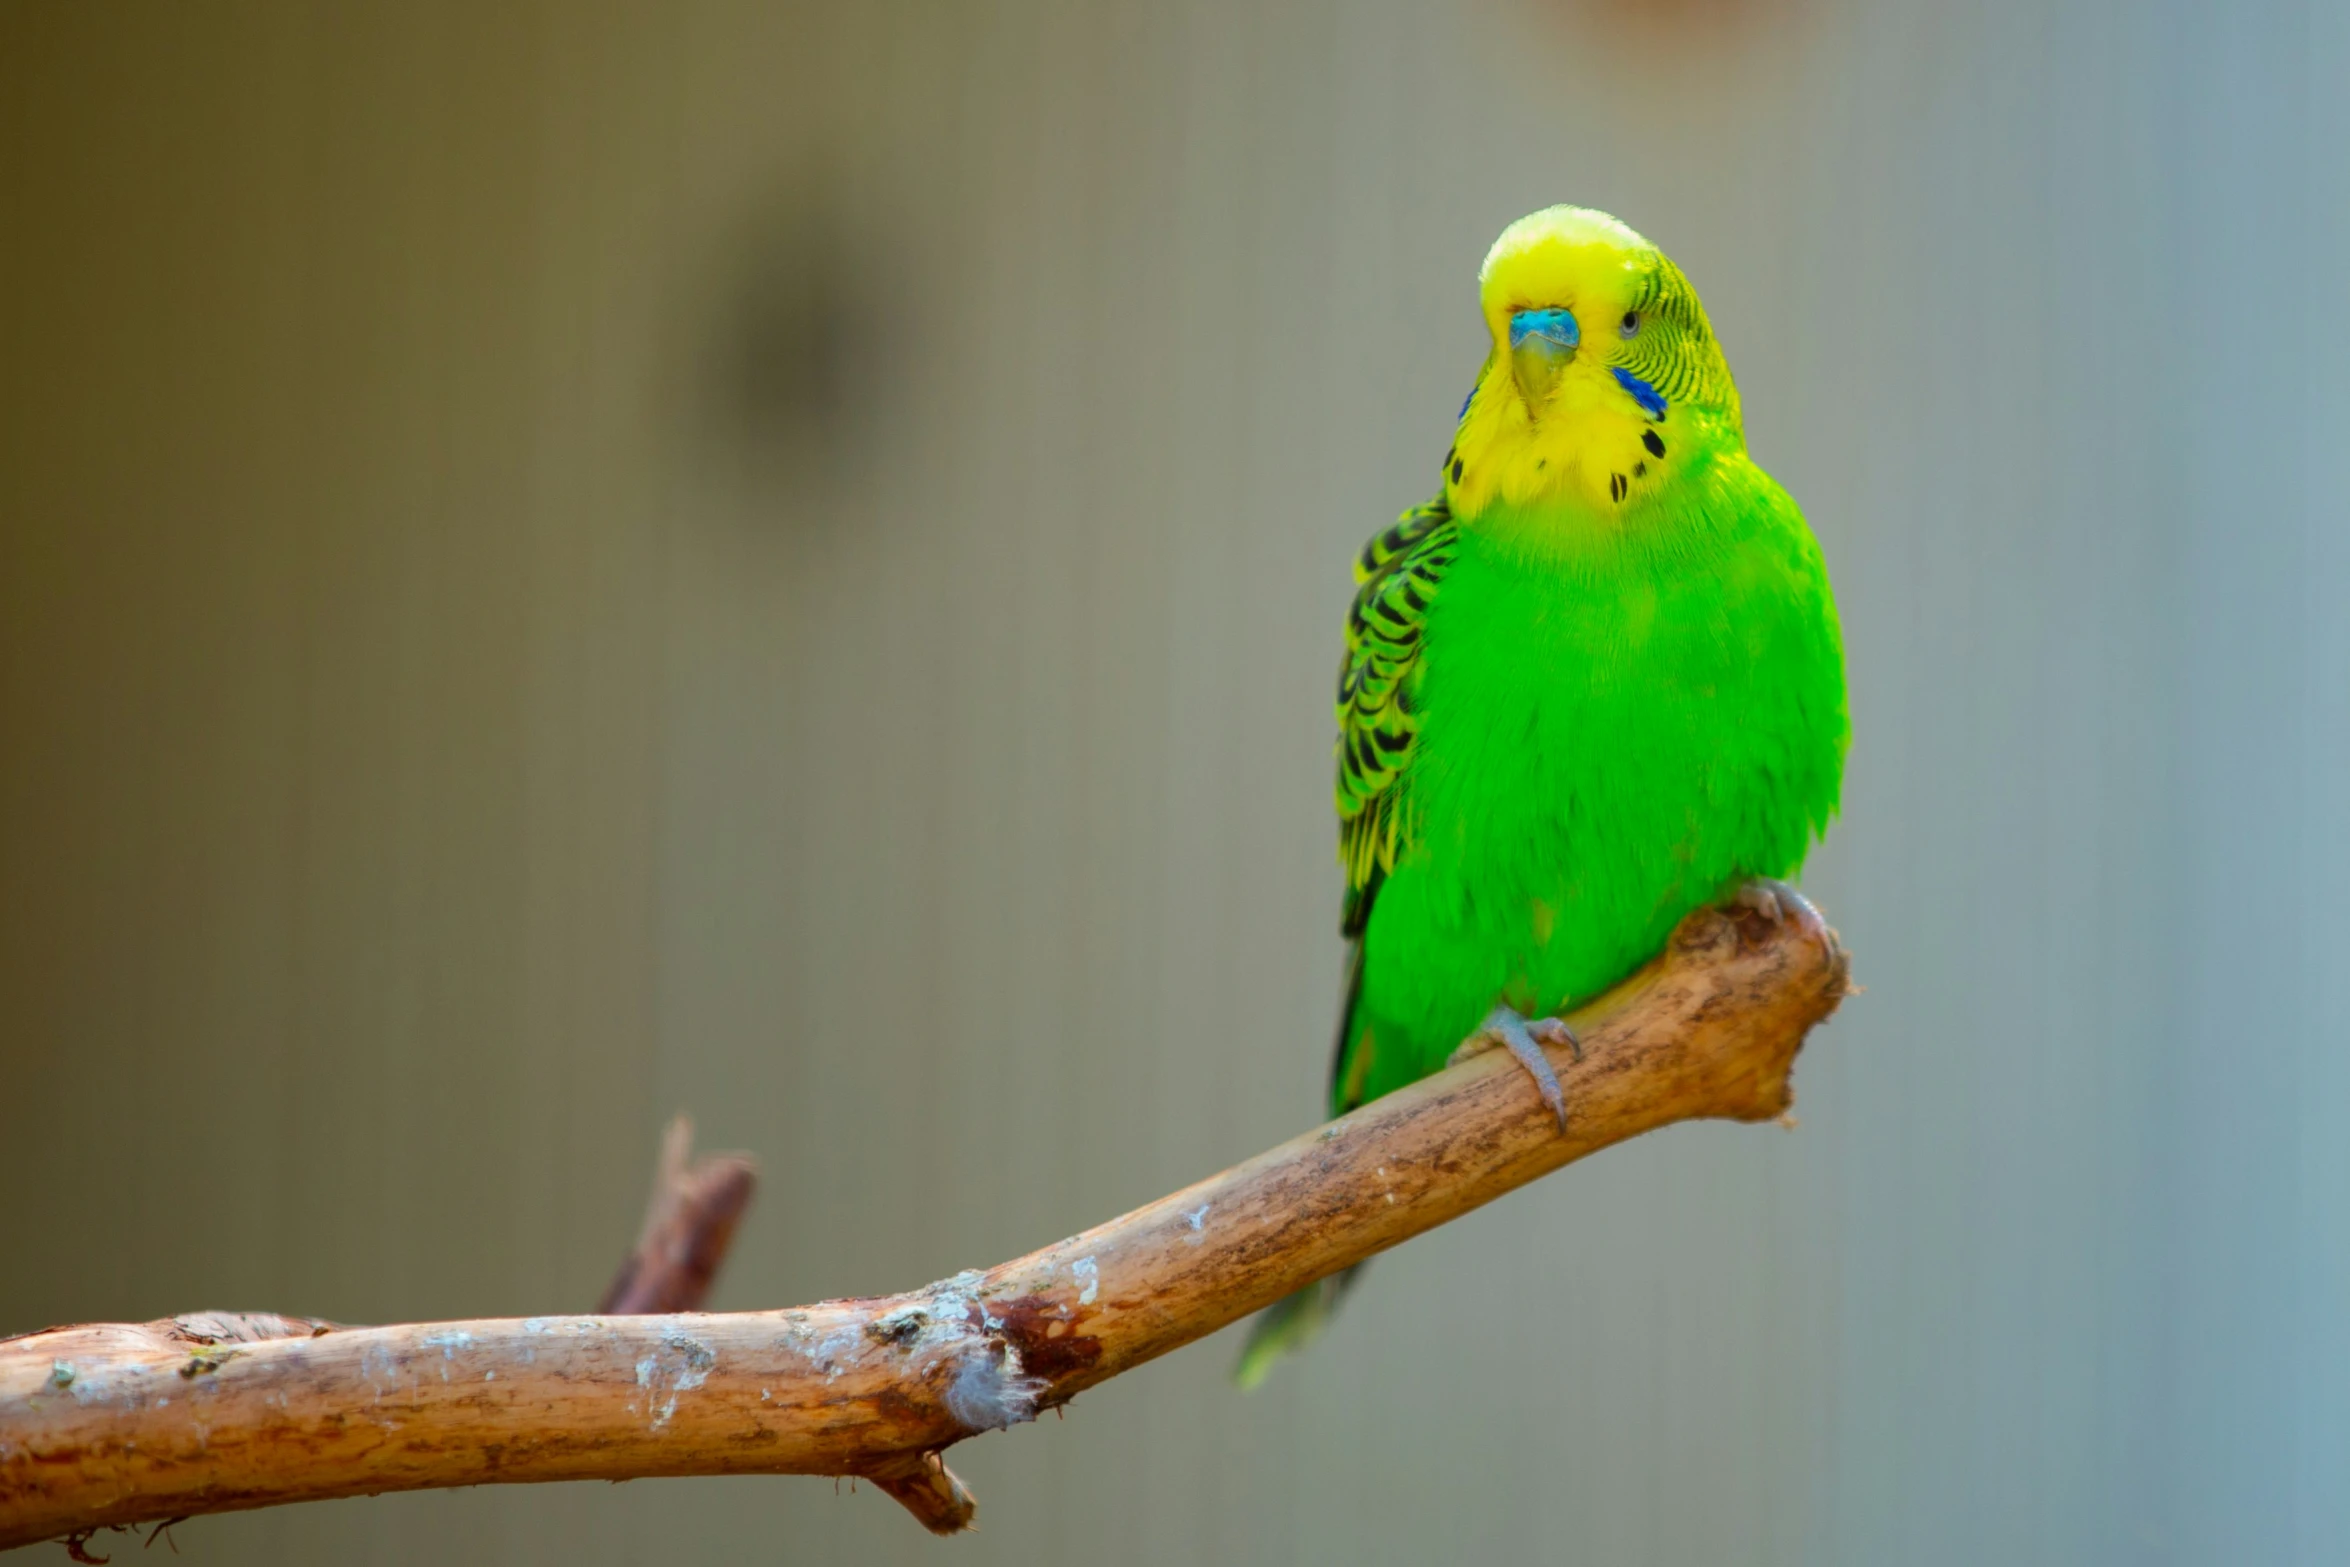 a yellow and green bird sitting on a twig